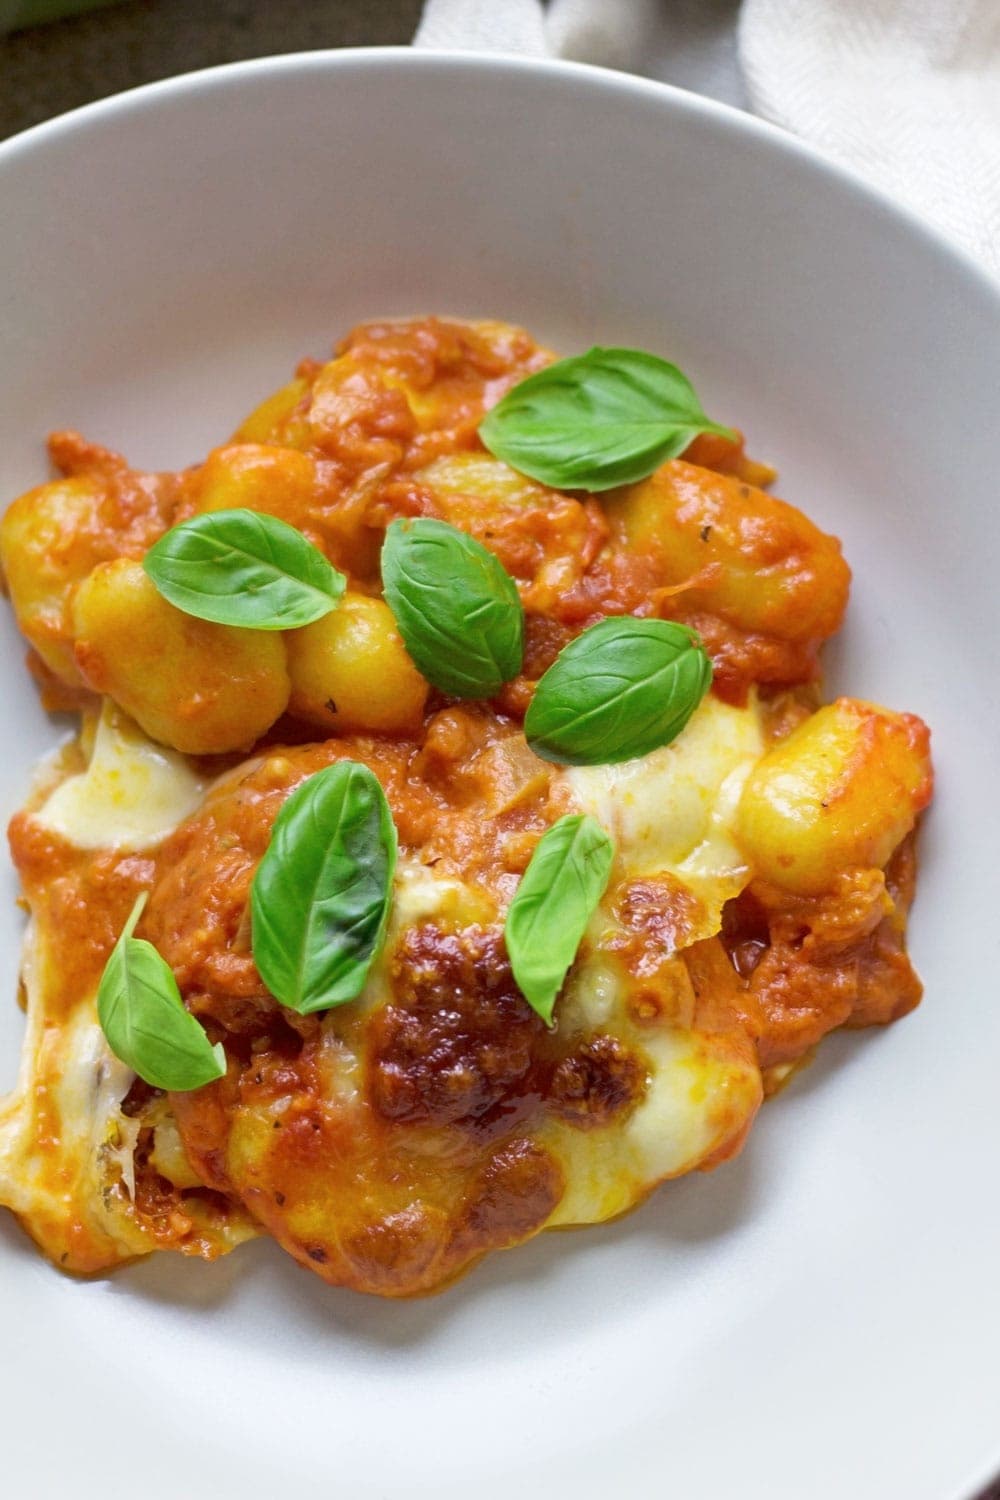 This cheese and tomato baked gnocchi is the perfect comfort dinner! Serve up a bowlful when you need a pick-me-up and you'll feel better in no time.